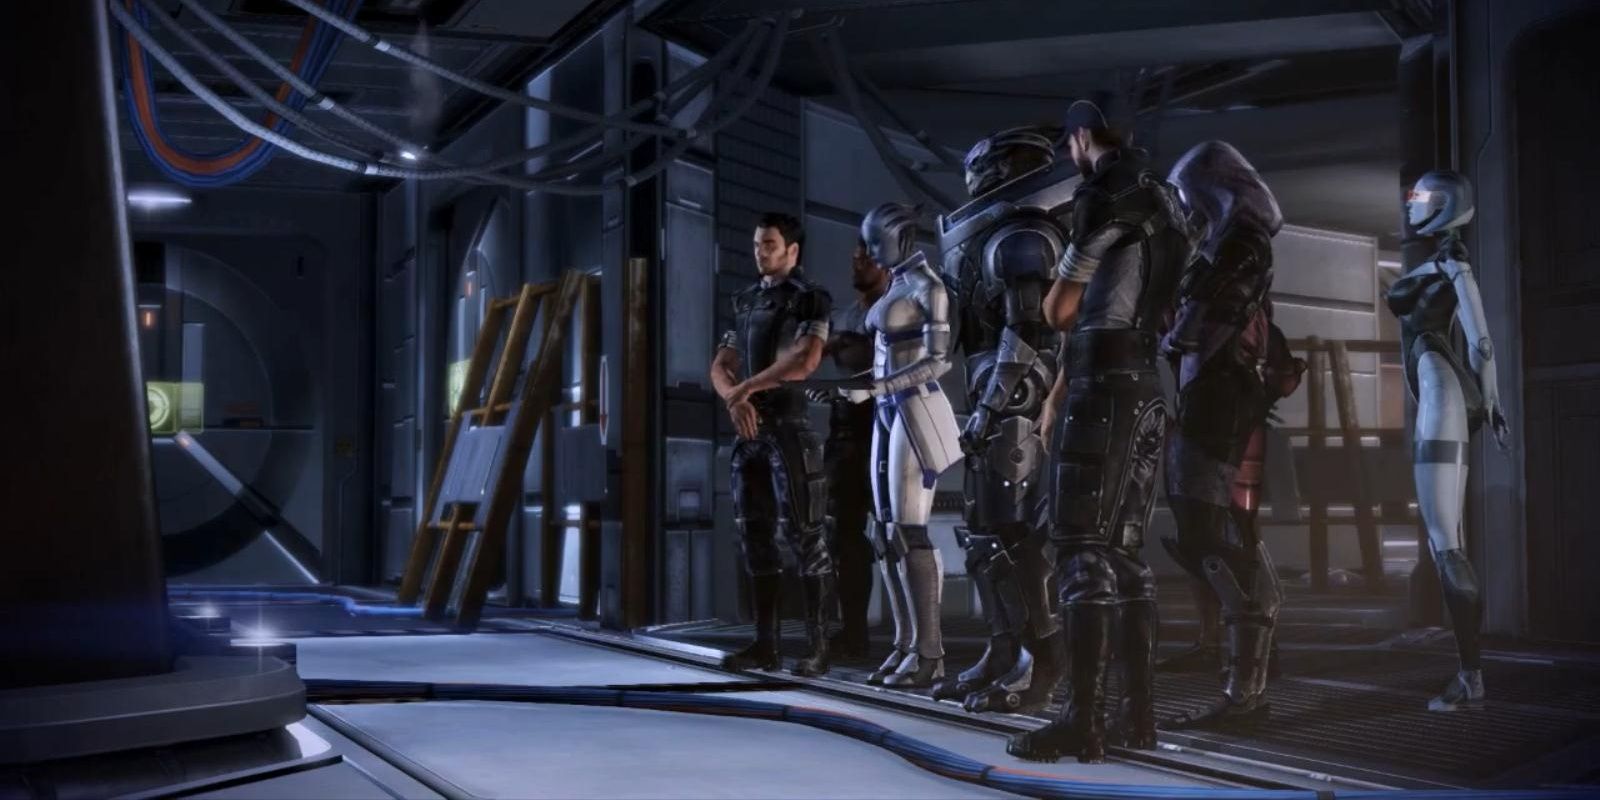 Shepard's Crew mourns his loss but will look for him if they have a clue of his survival